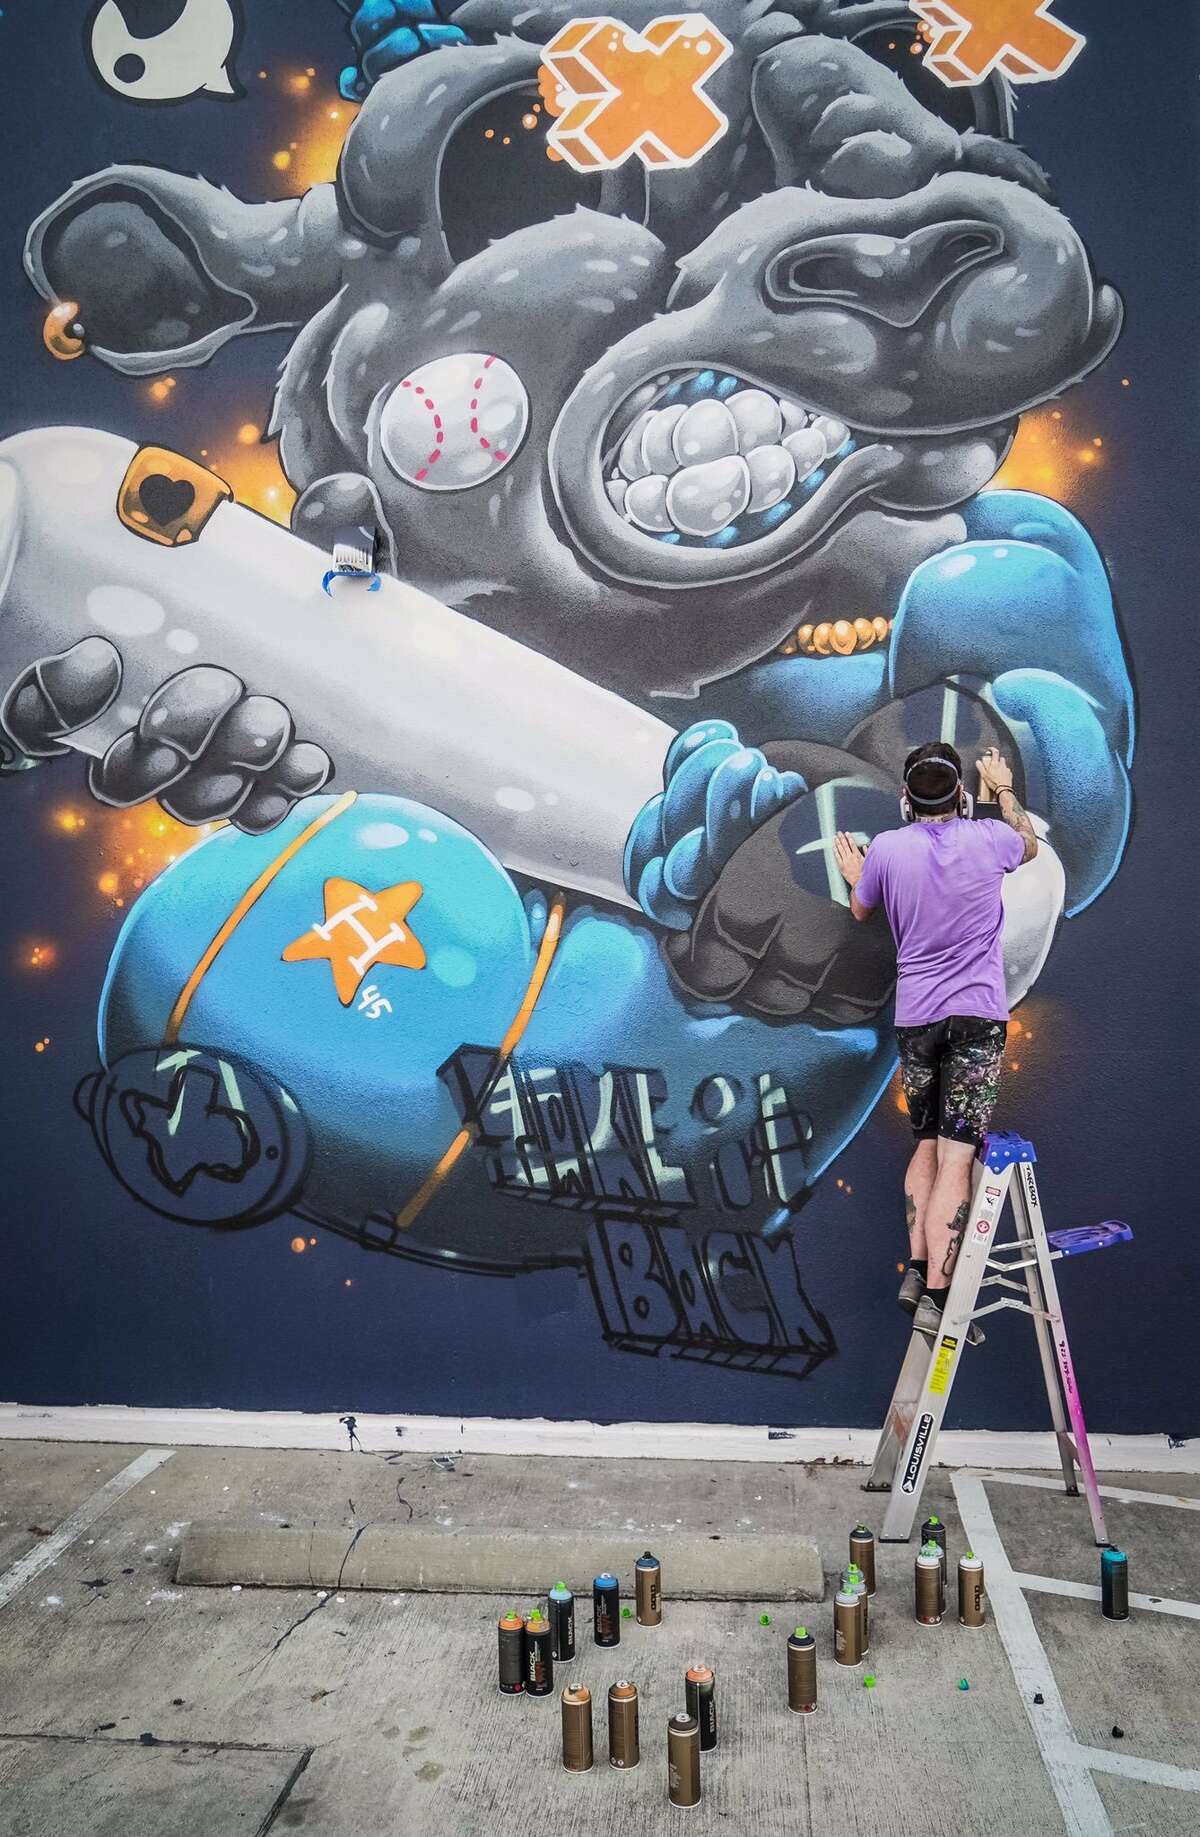 Playoff Win #2 (ALDS Game 2)Lola in the Heights1102 Yale StreetArtist: @tarboxx2 on Instagram